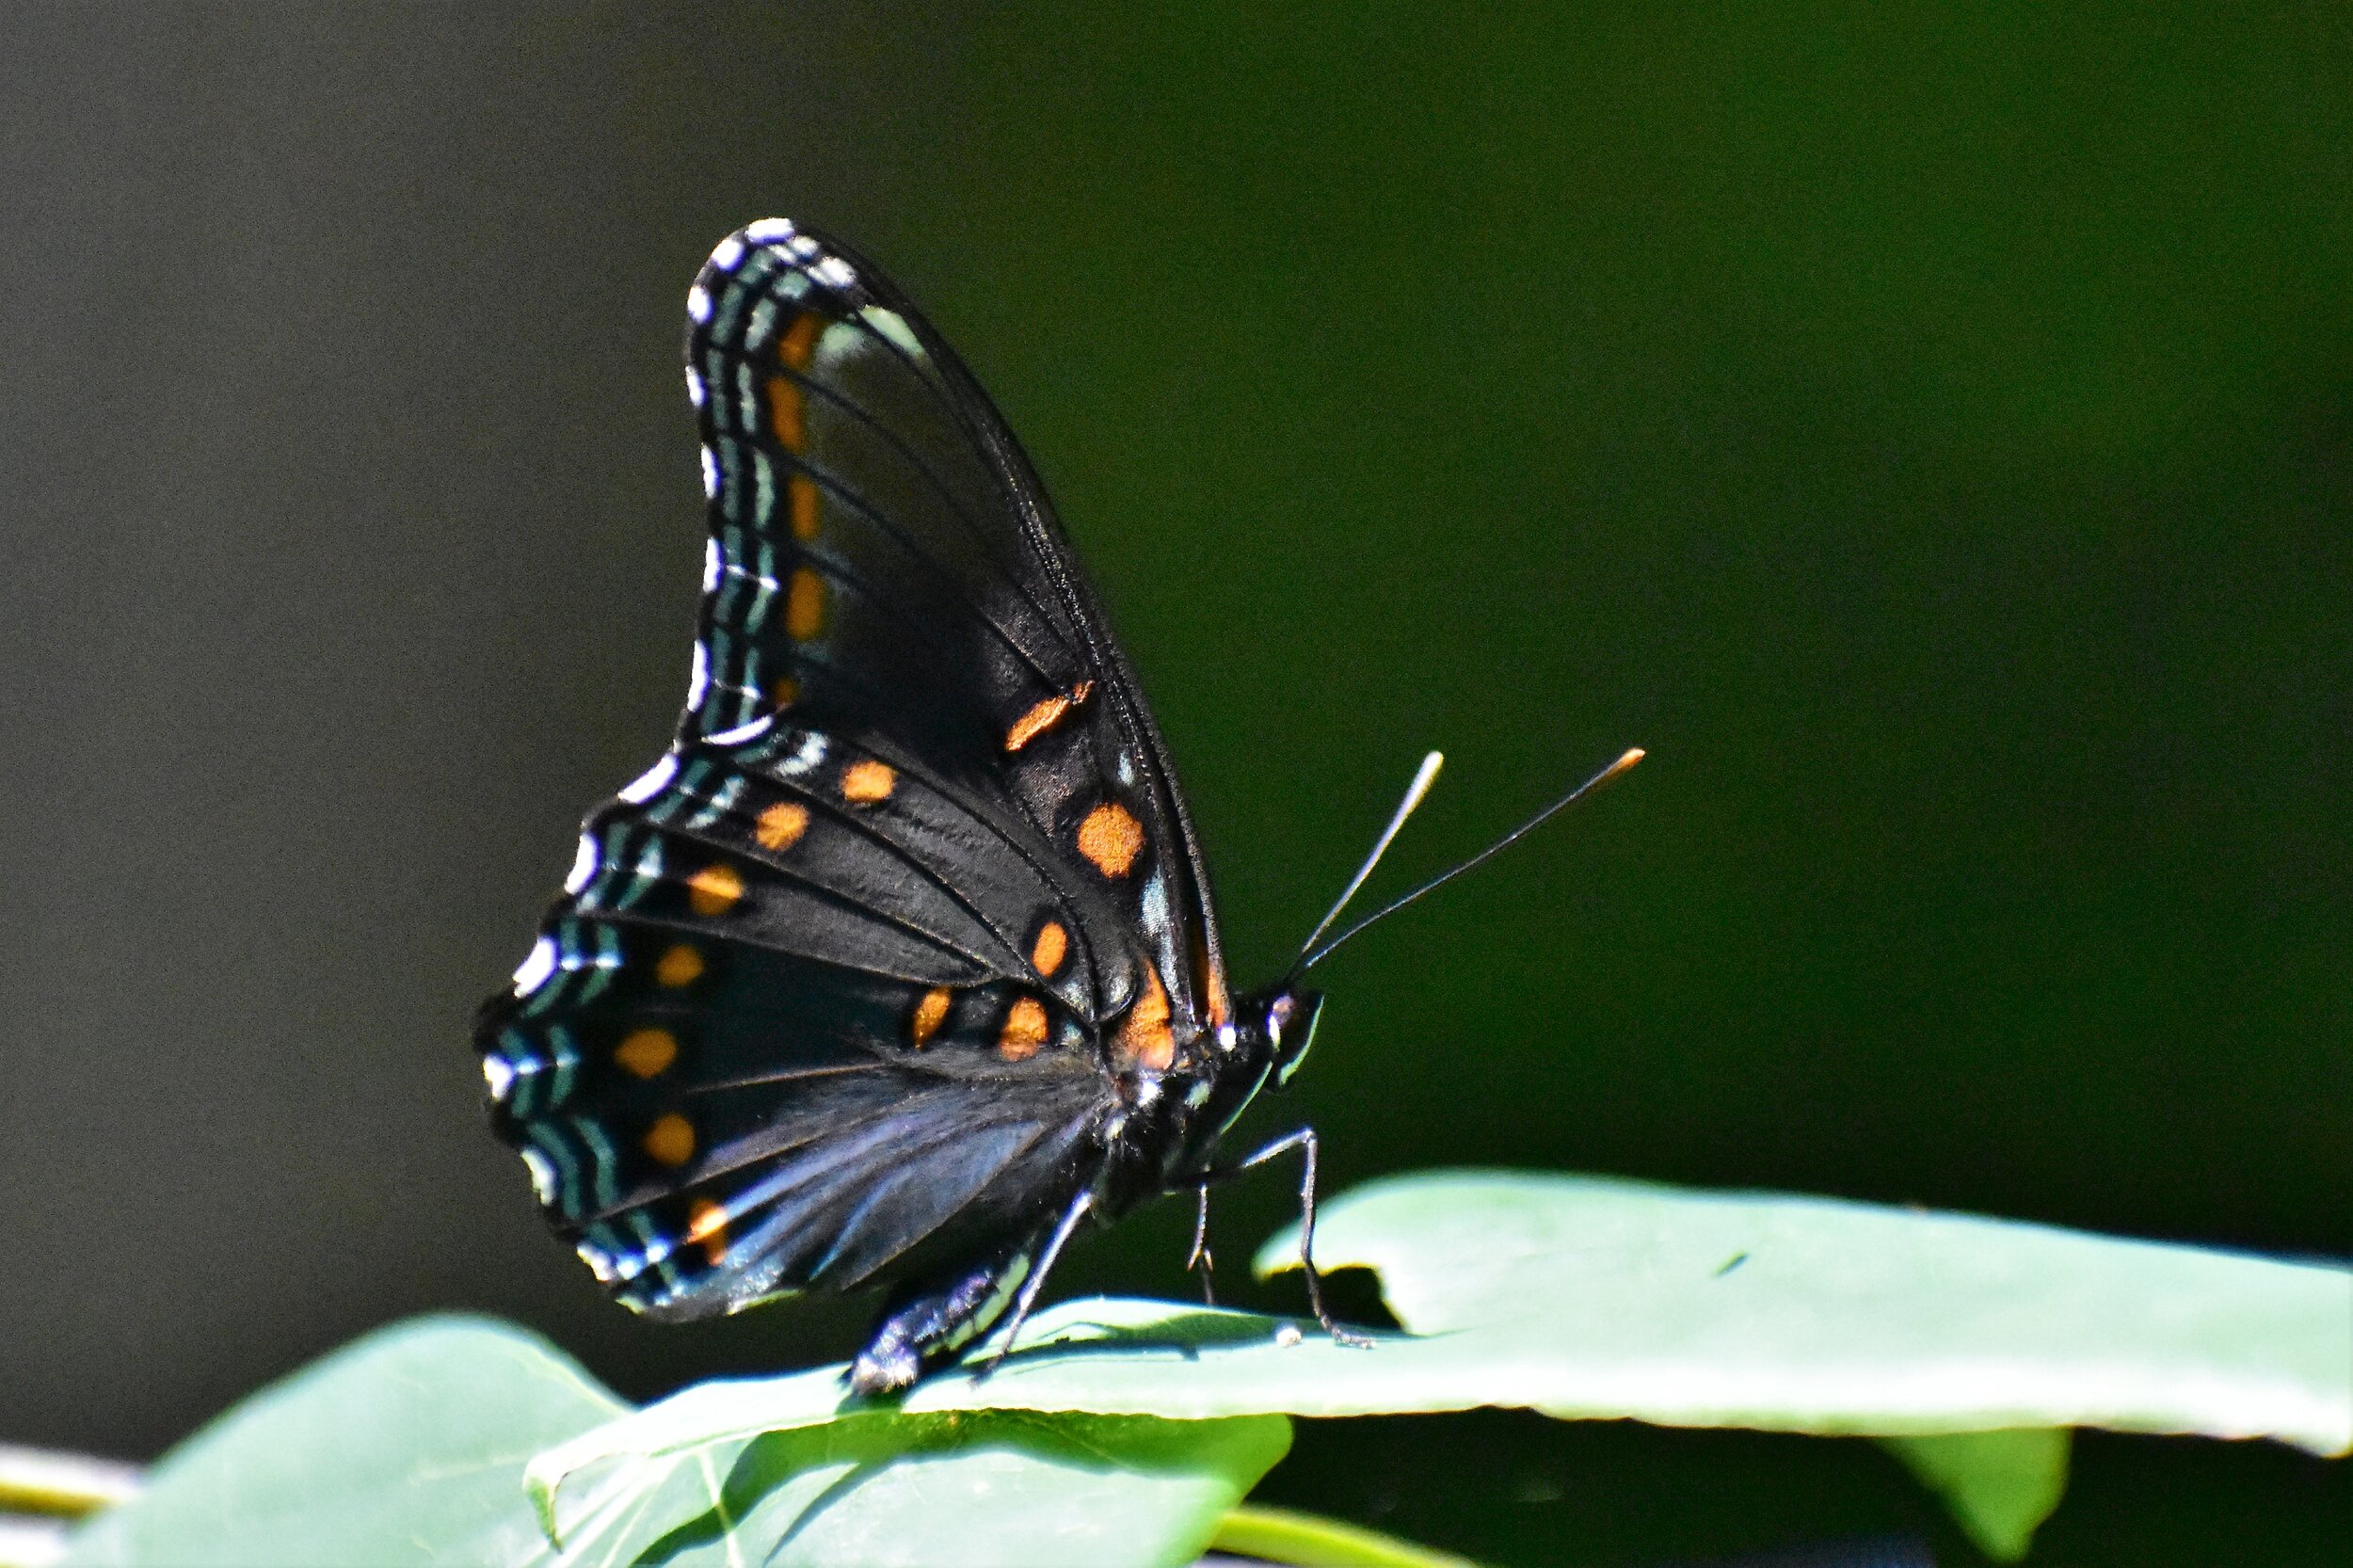 Red-spotted purple butterfly